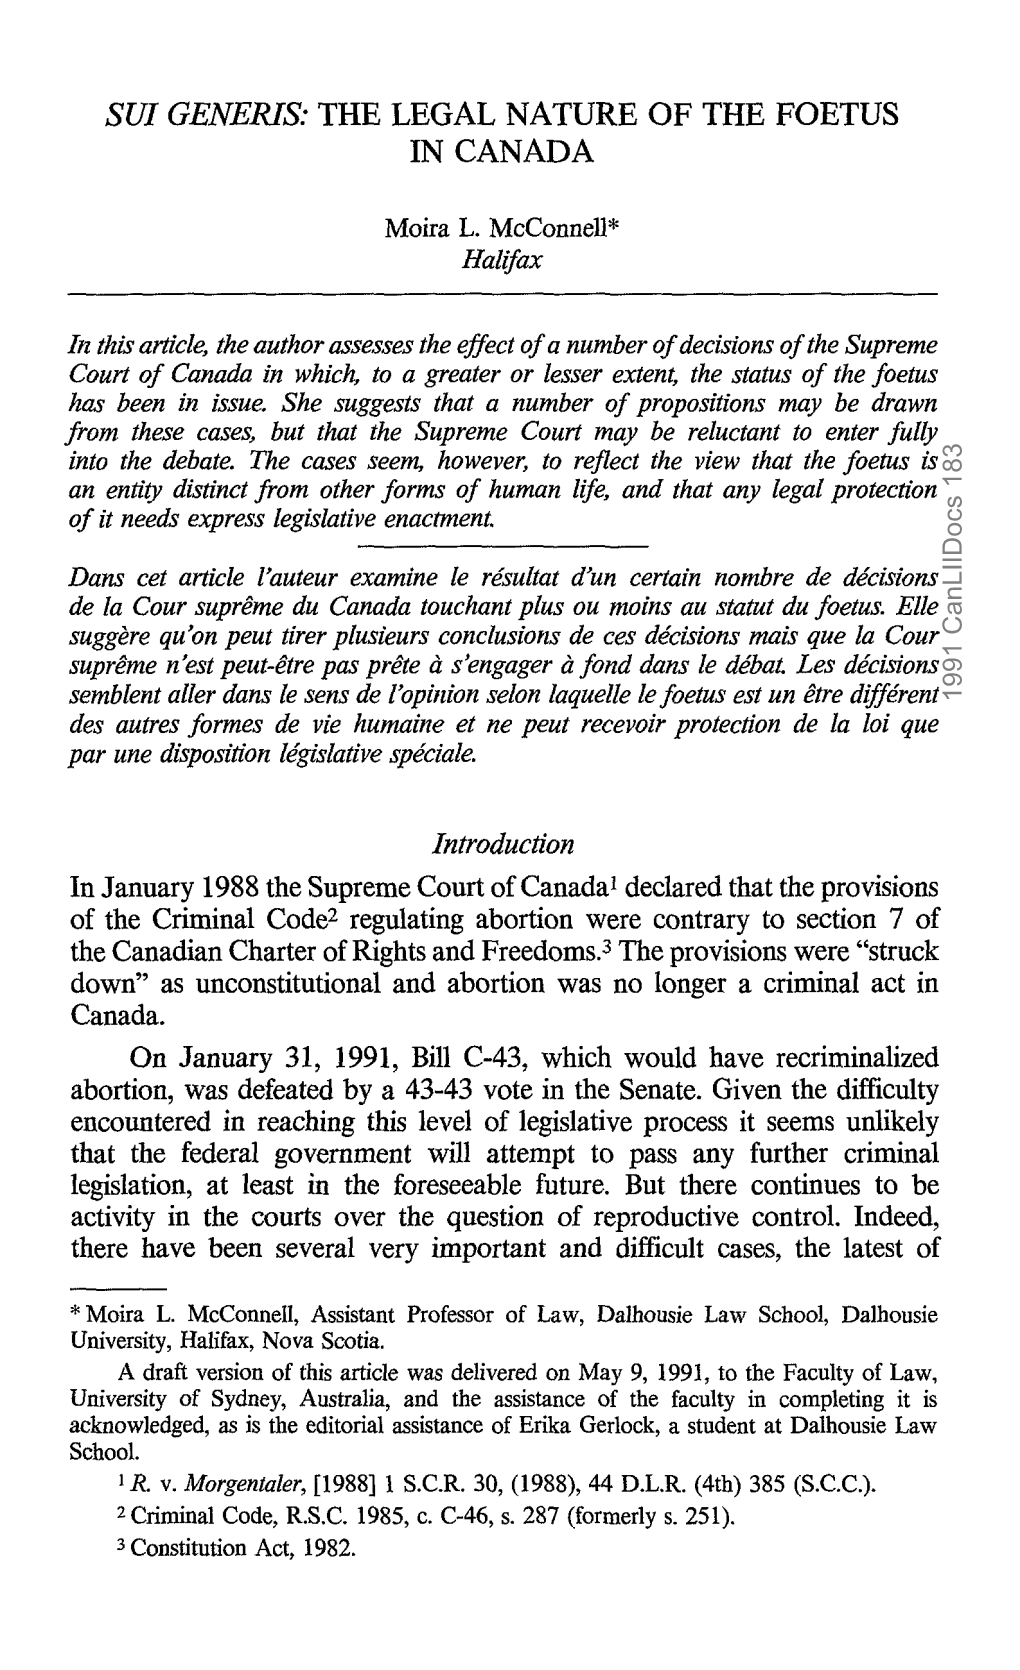 In January 1988 the Supreme Court of Canada' Declared That The